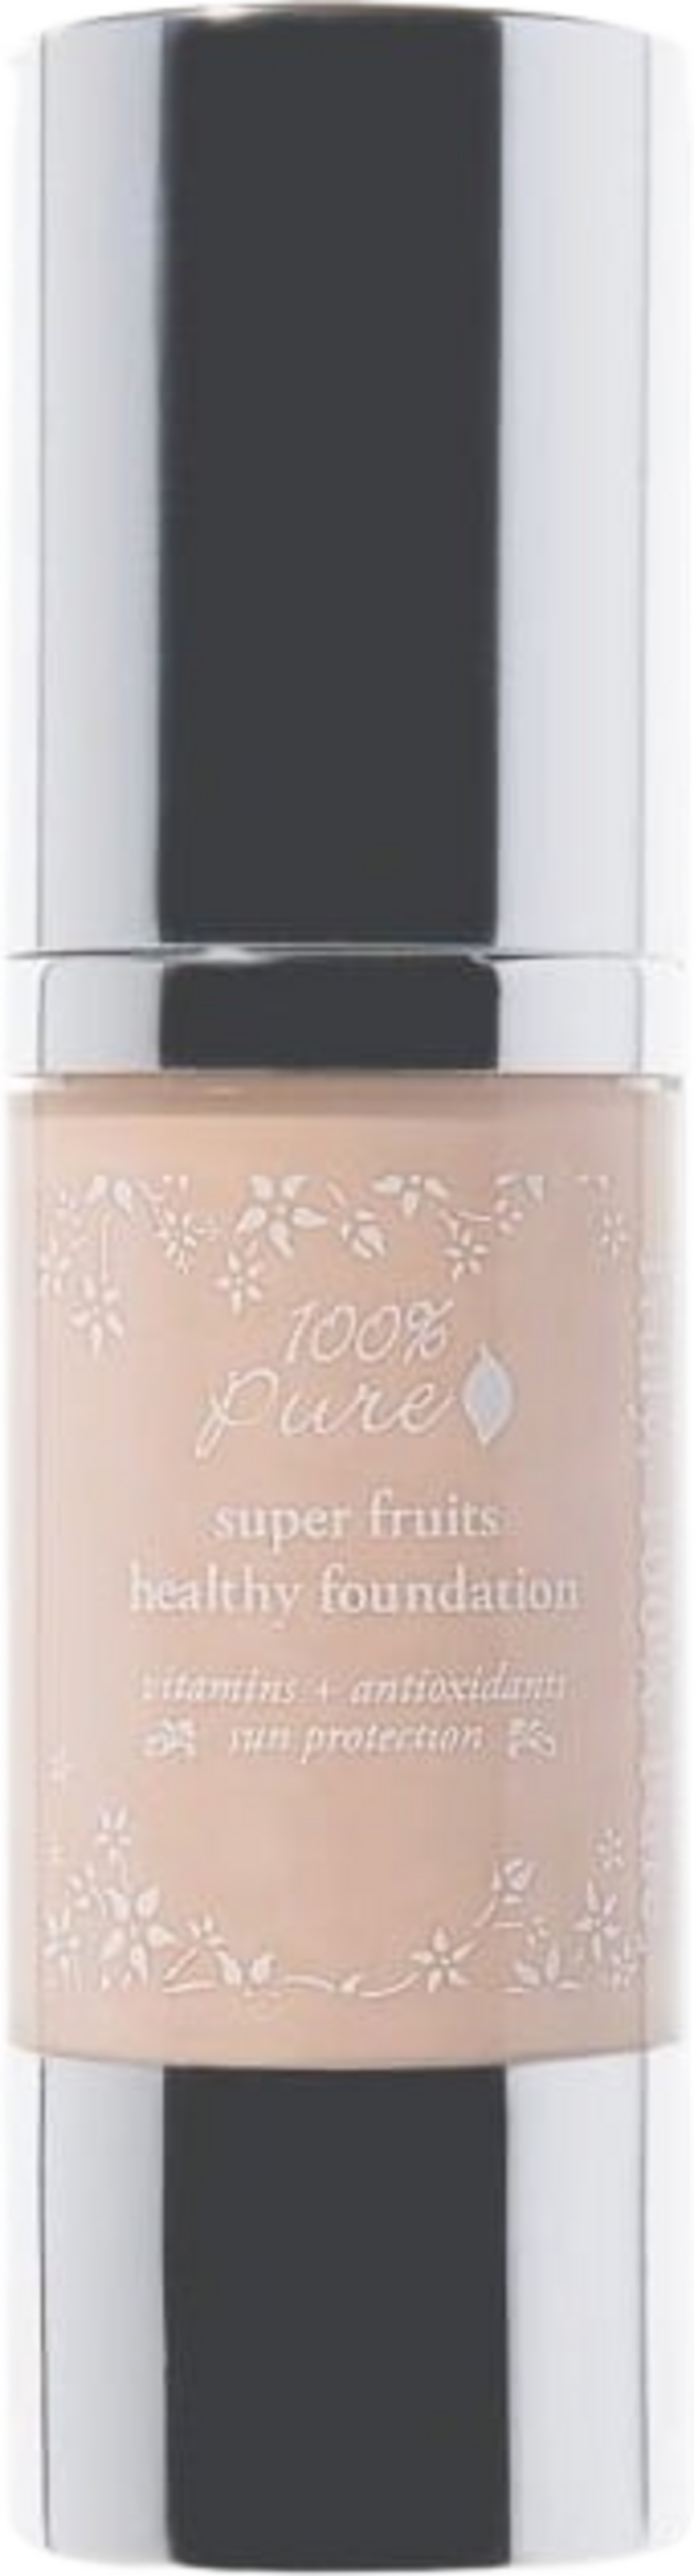 100% Pure Fruit Pigmented Healthy Foundation - White Peach (light)